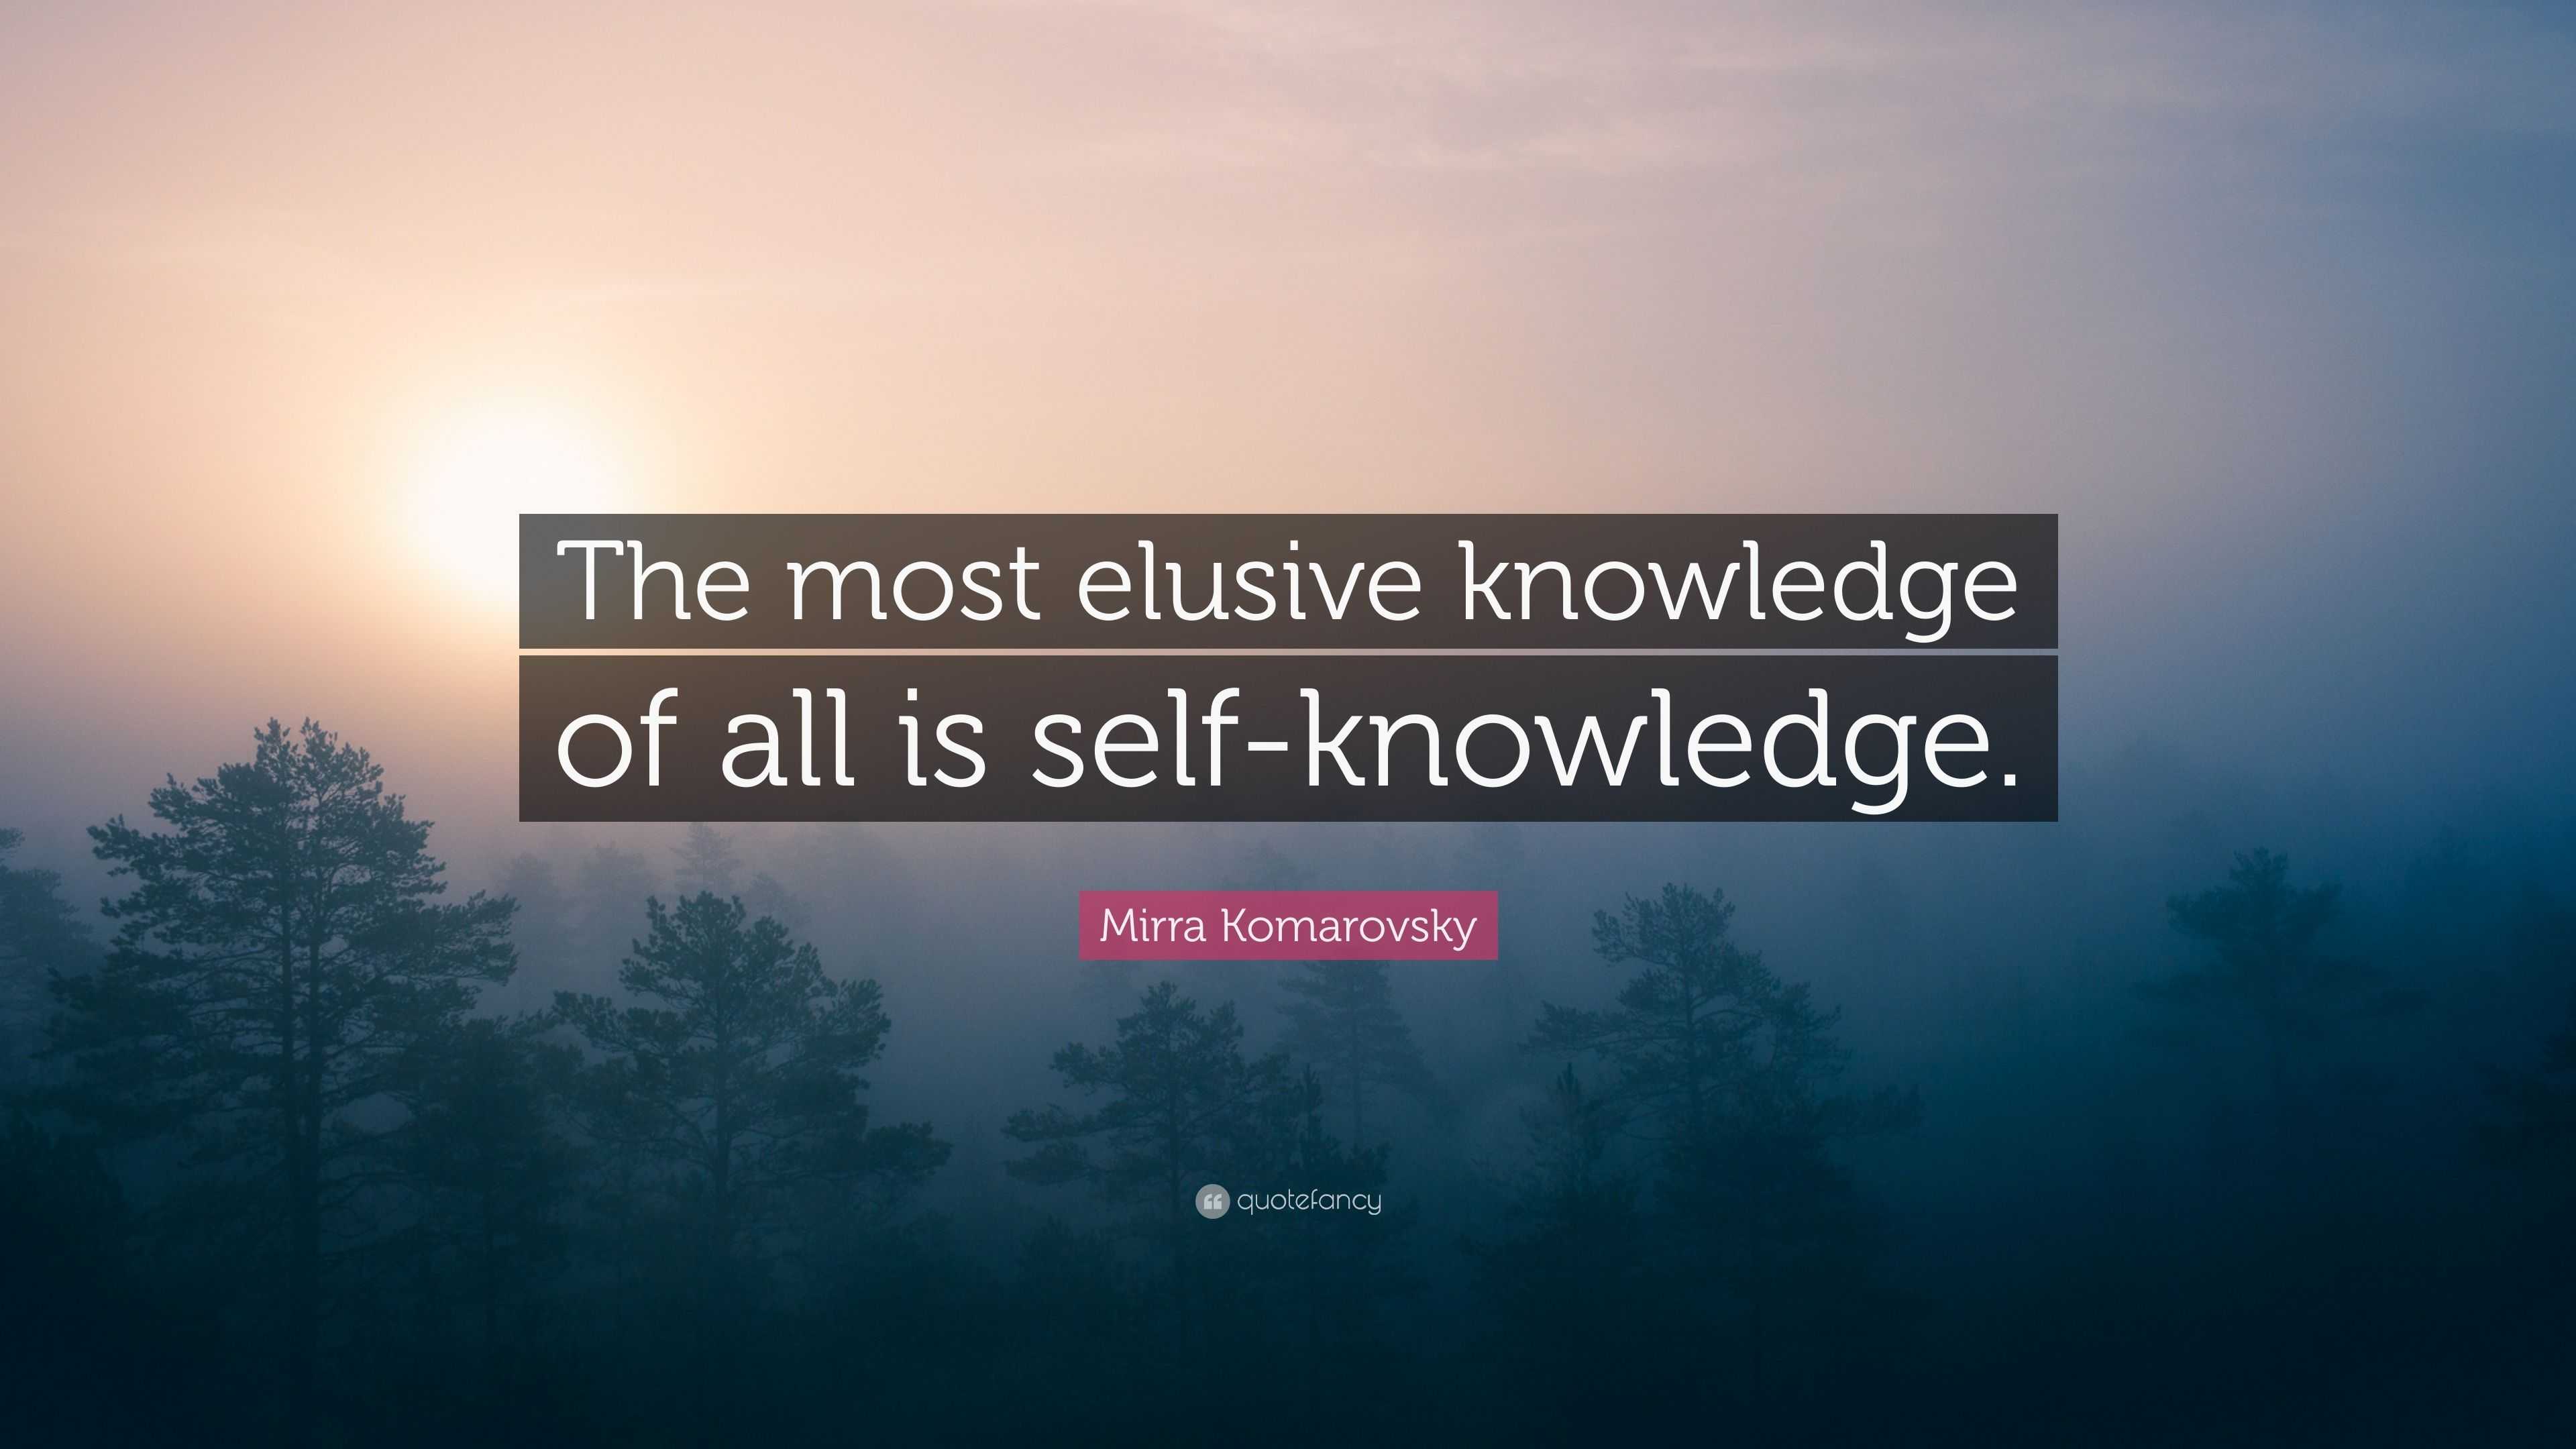 Mirra Komarovsky Quote: "The most elusive knowledge of all is self-knowledge." (7 wallpapers ...